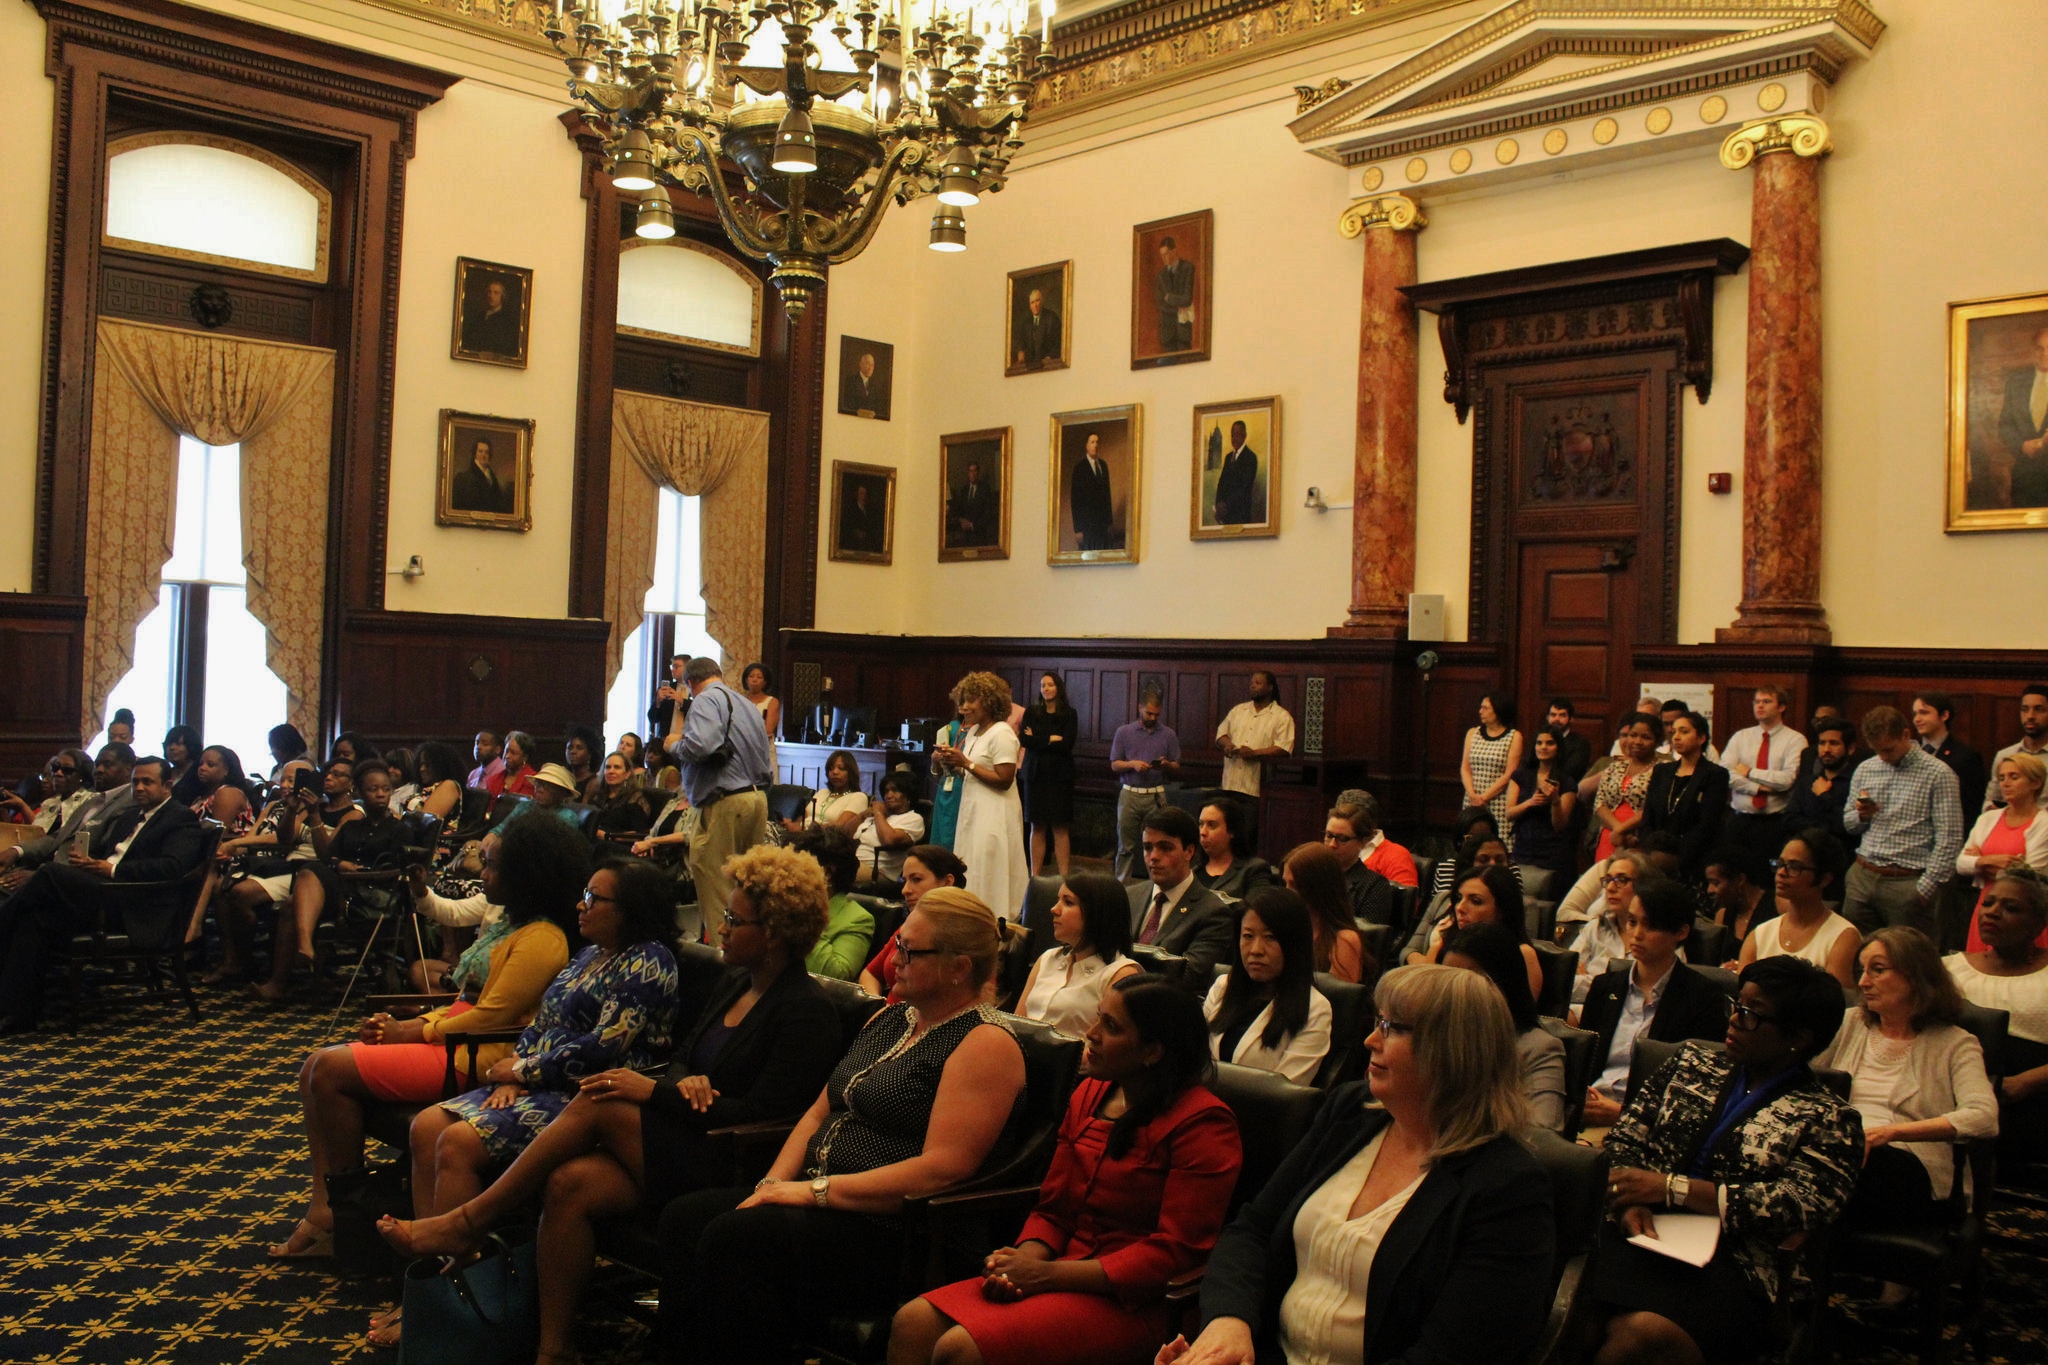 Women sit in the Mayor's Reception Room in City Hall. In the background there are paintings of former mayors.